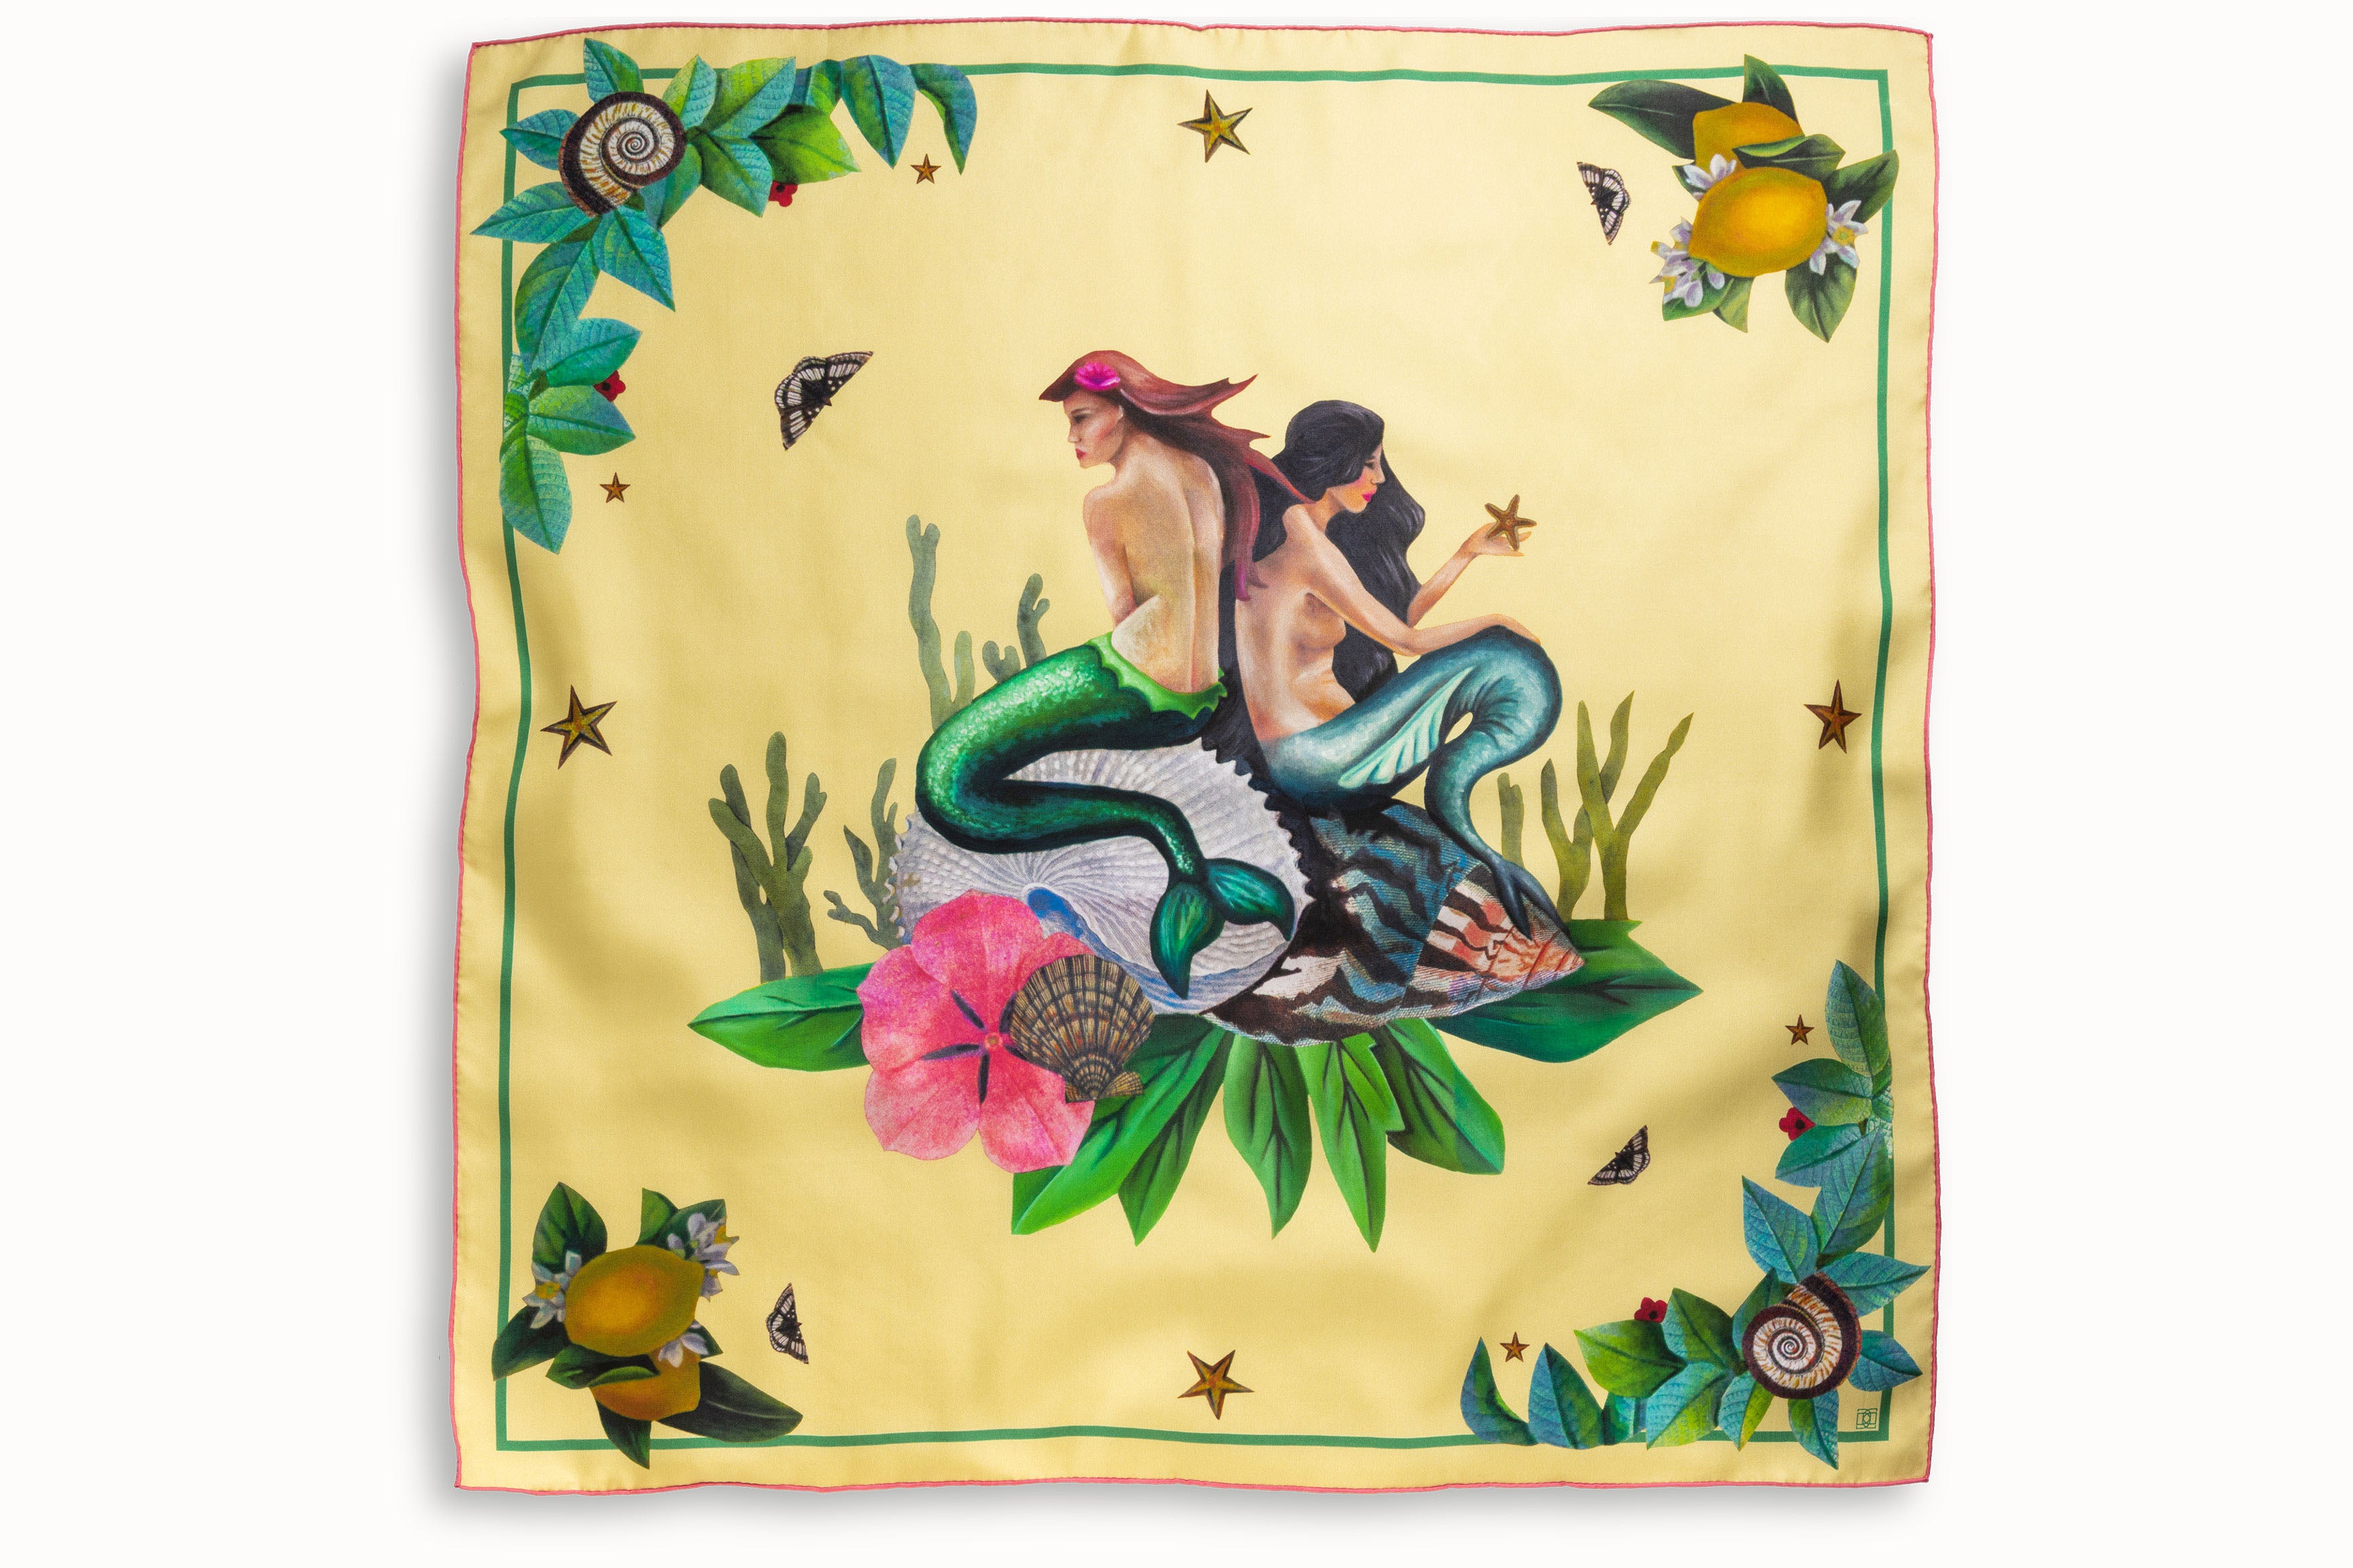 Flatlay image of 100% silk square scarf featuring two painted two mermaids resting on large sea shells, a pink flower and green seaweed on a lemon yellow background with small butterfly accents. Thin green border around the edges of the scarf, layered with green leaves, seashells and lemons.